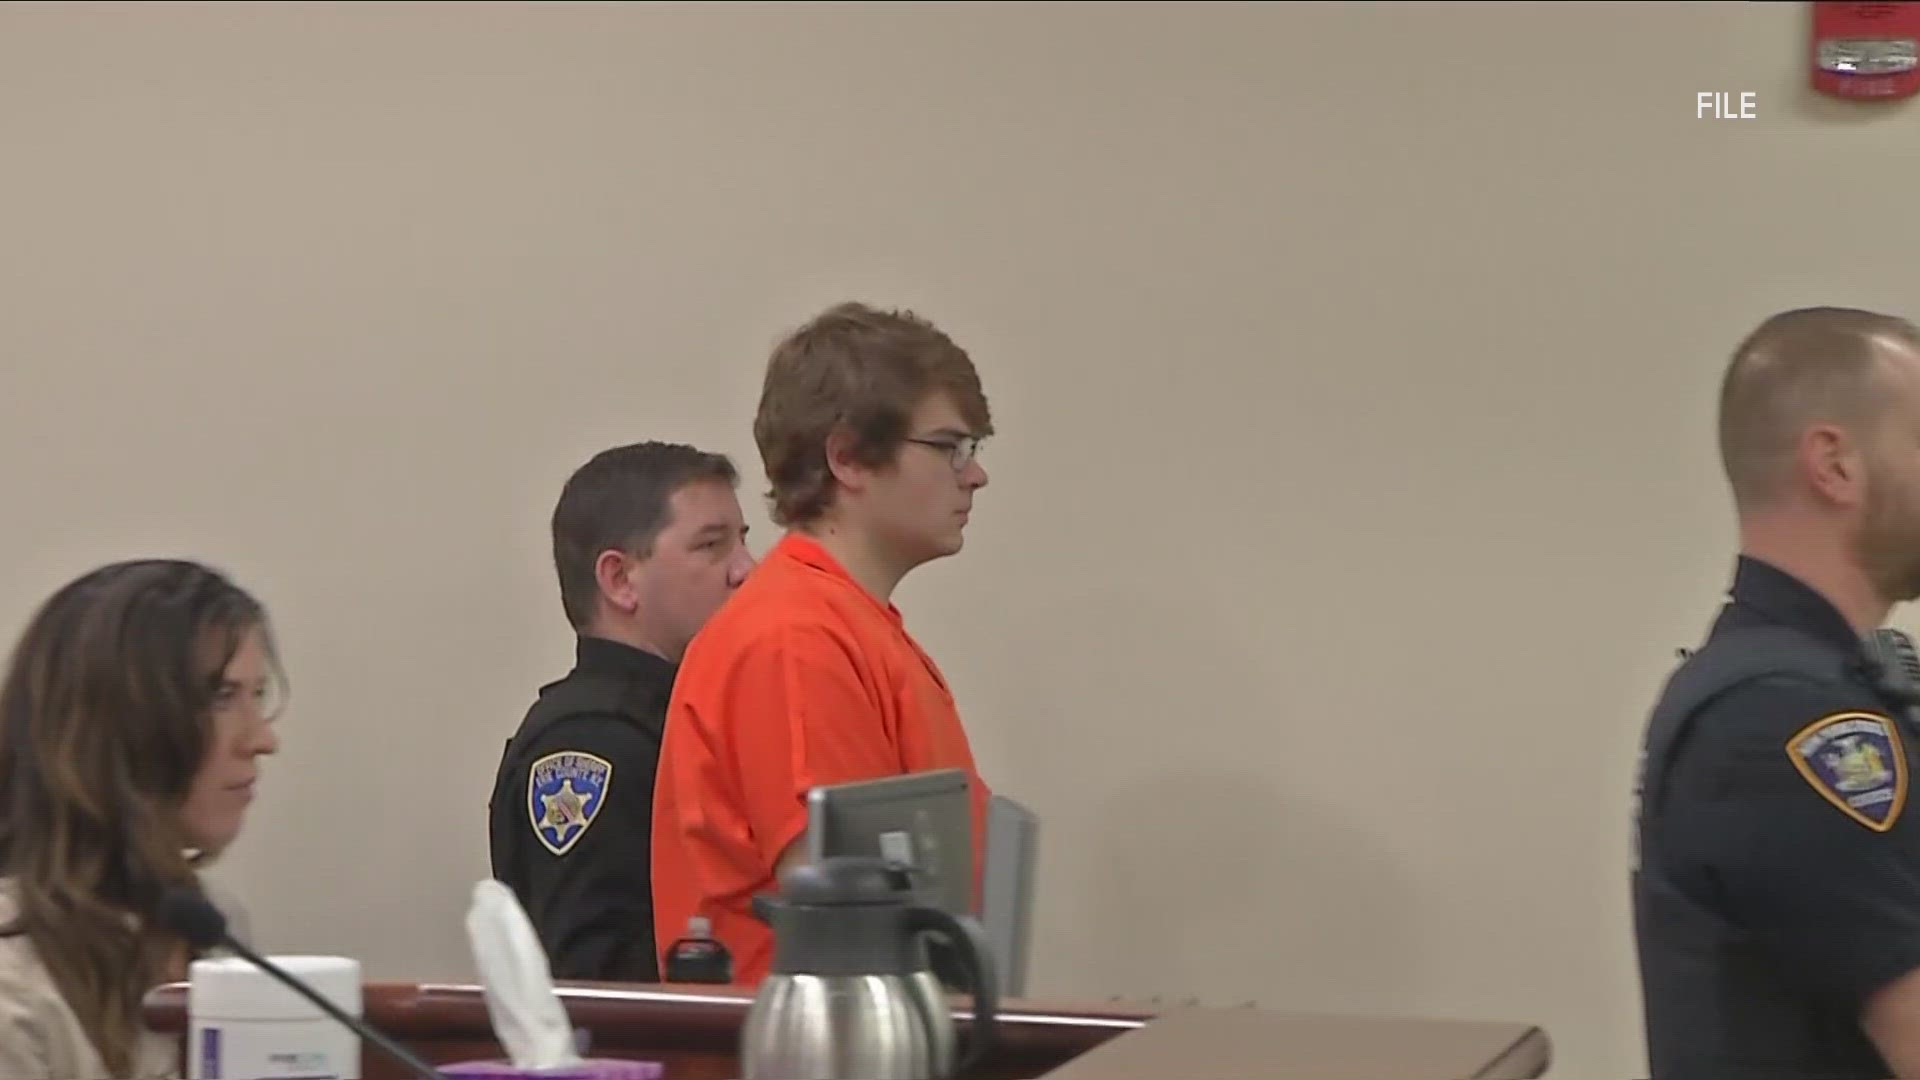 oral arguments started in federal court over motions involving Payton Gendron's upcoming criminal trial.